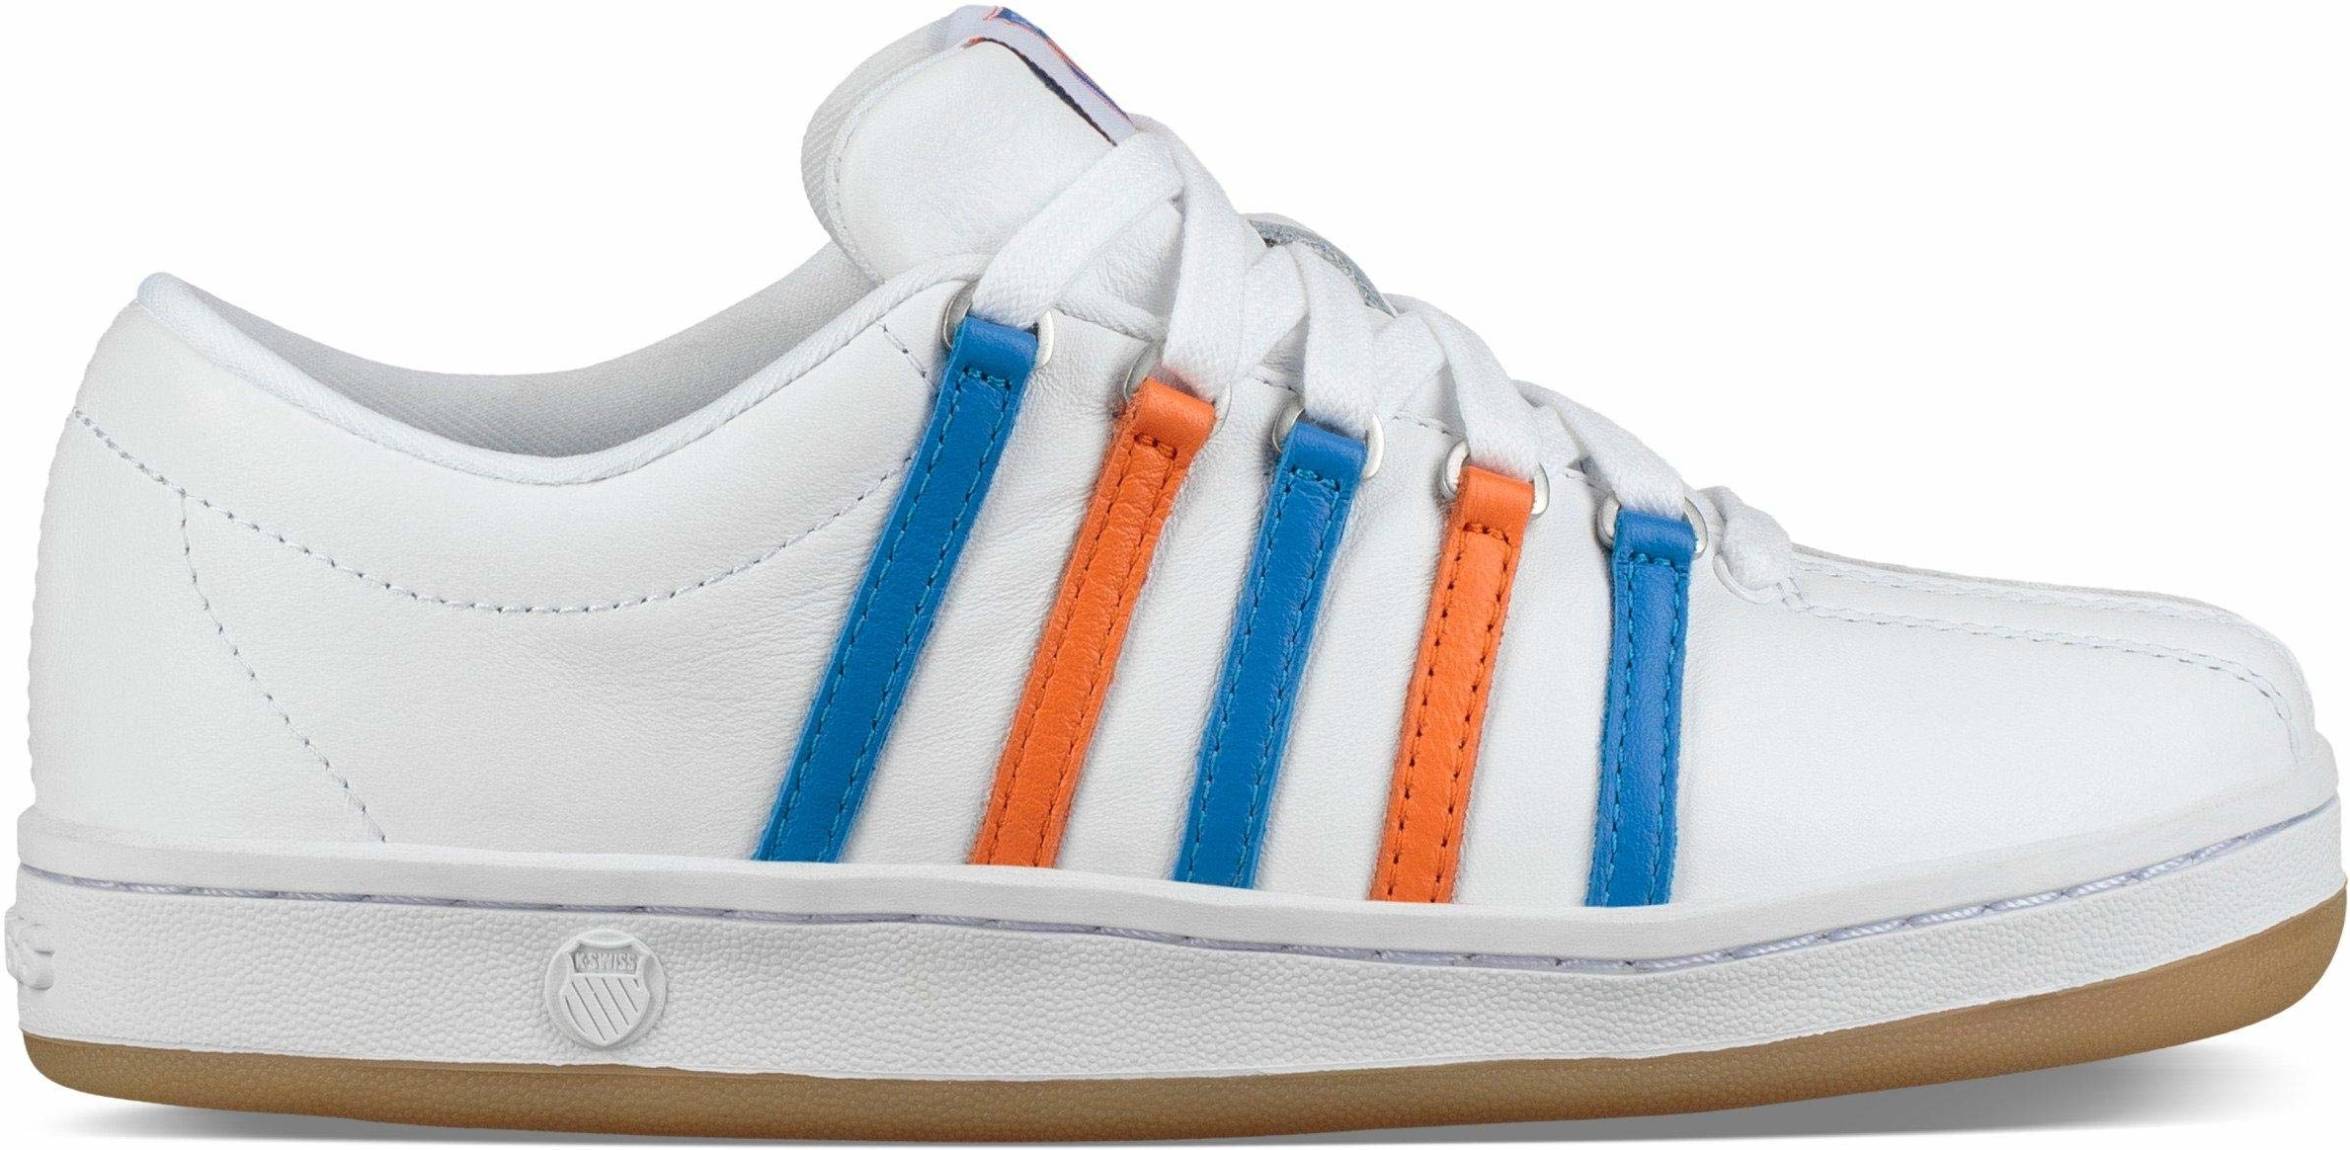 Save 38% on White K-Swiss Sneakers (15 